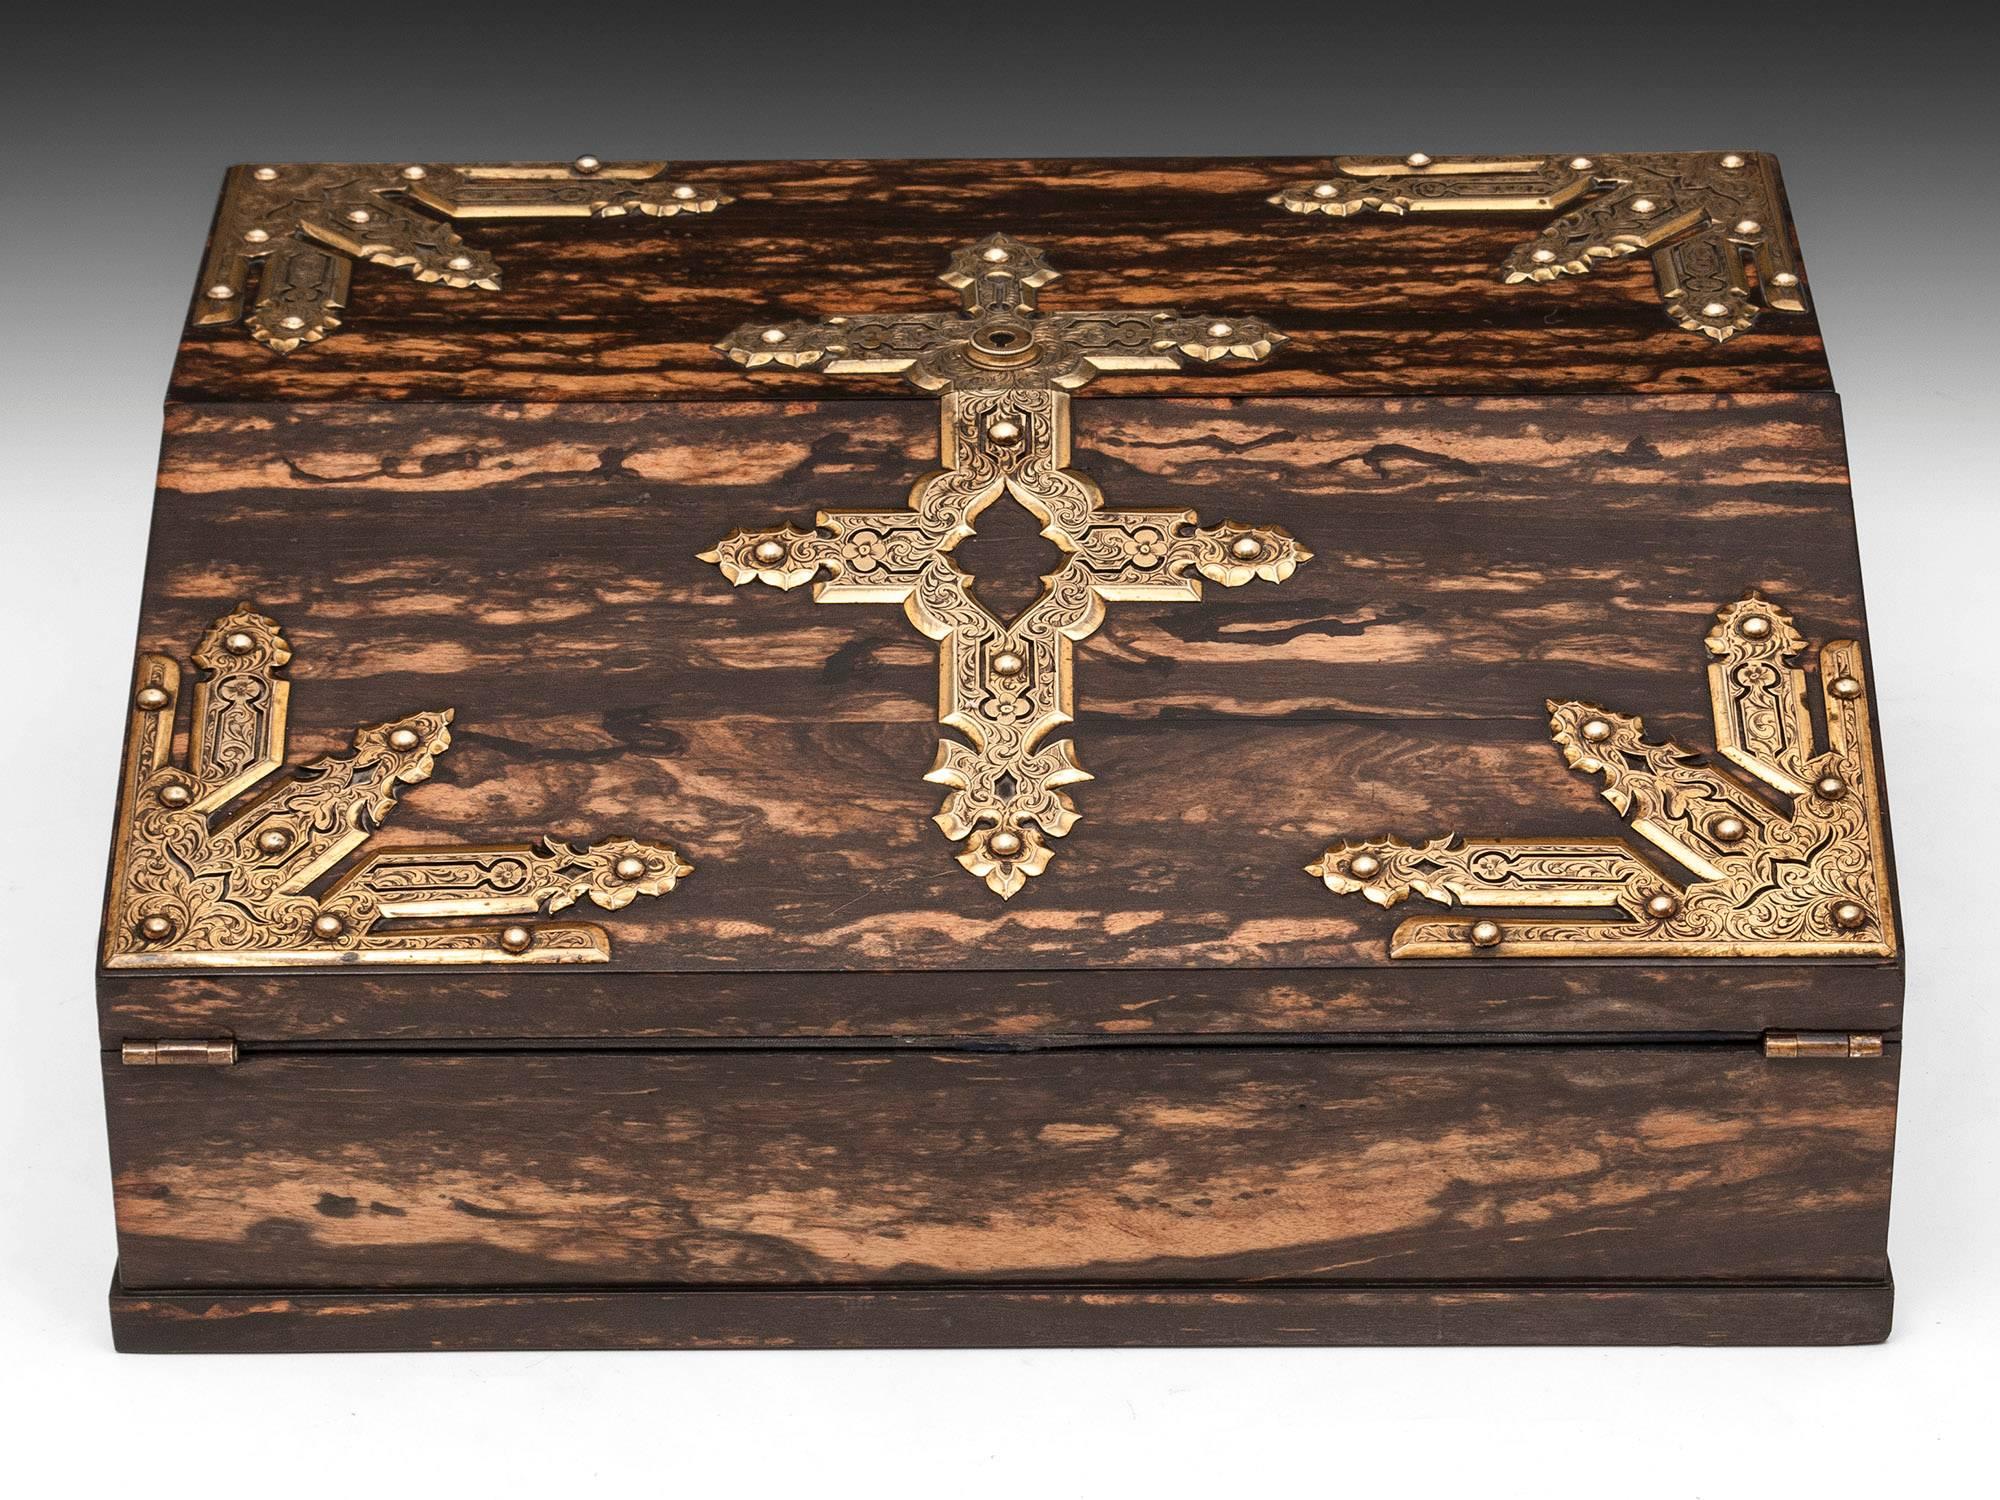 Betjemann Coromandel & Satinwood Writing box with stunning veneers, engraved gilded brass decoration and escutcheon. 

The interior features a blue velvet and gold tooled writing surface which the top half can be lifted to reveal a solid satinwood